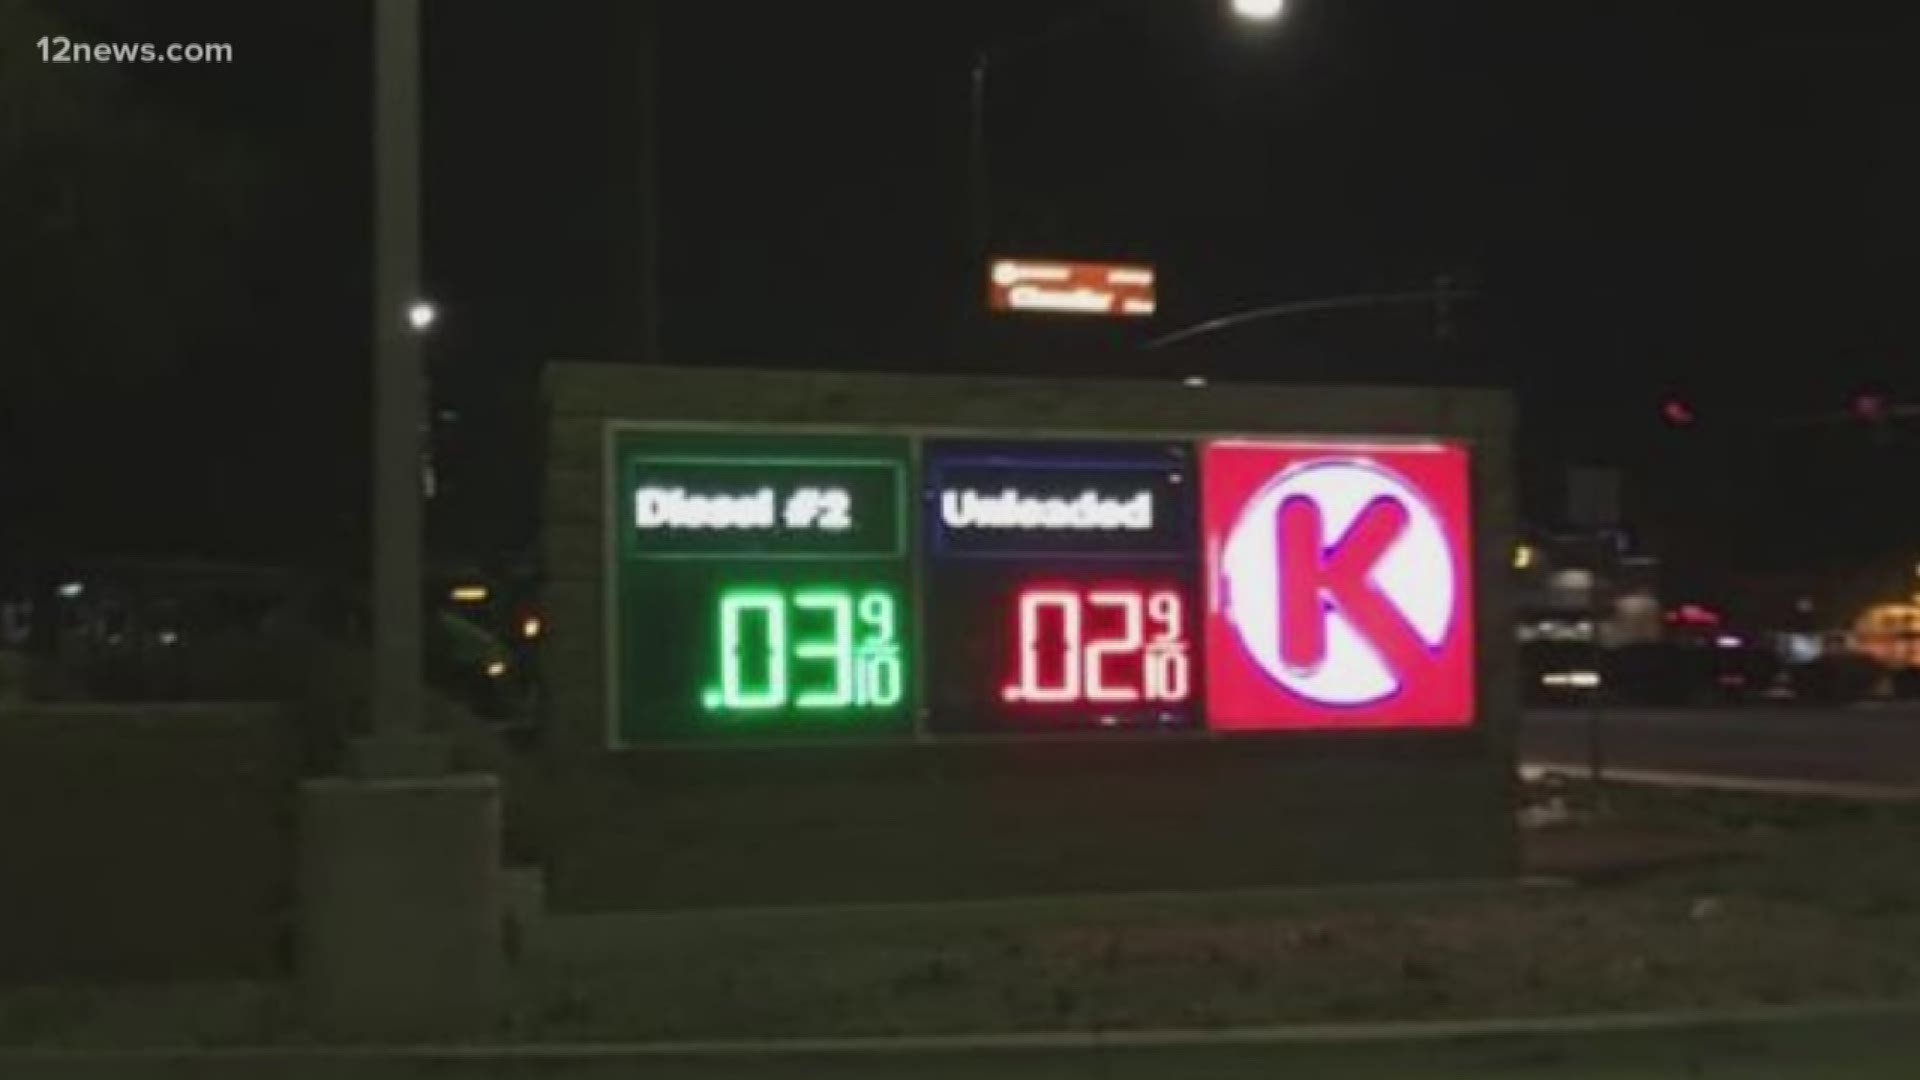 A glitch at a gas pump in Chandler brought a little (or a lot) extra savings to East Valley drivers last night. The Circle K near 45th St. and Chandler Blvd. was giving away gas for two cents a gallon, and a few lucky people saved a lot of cash.